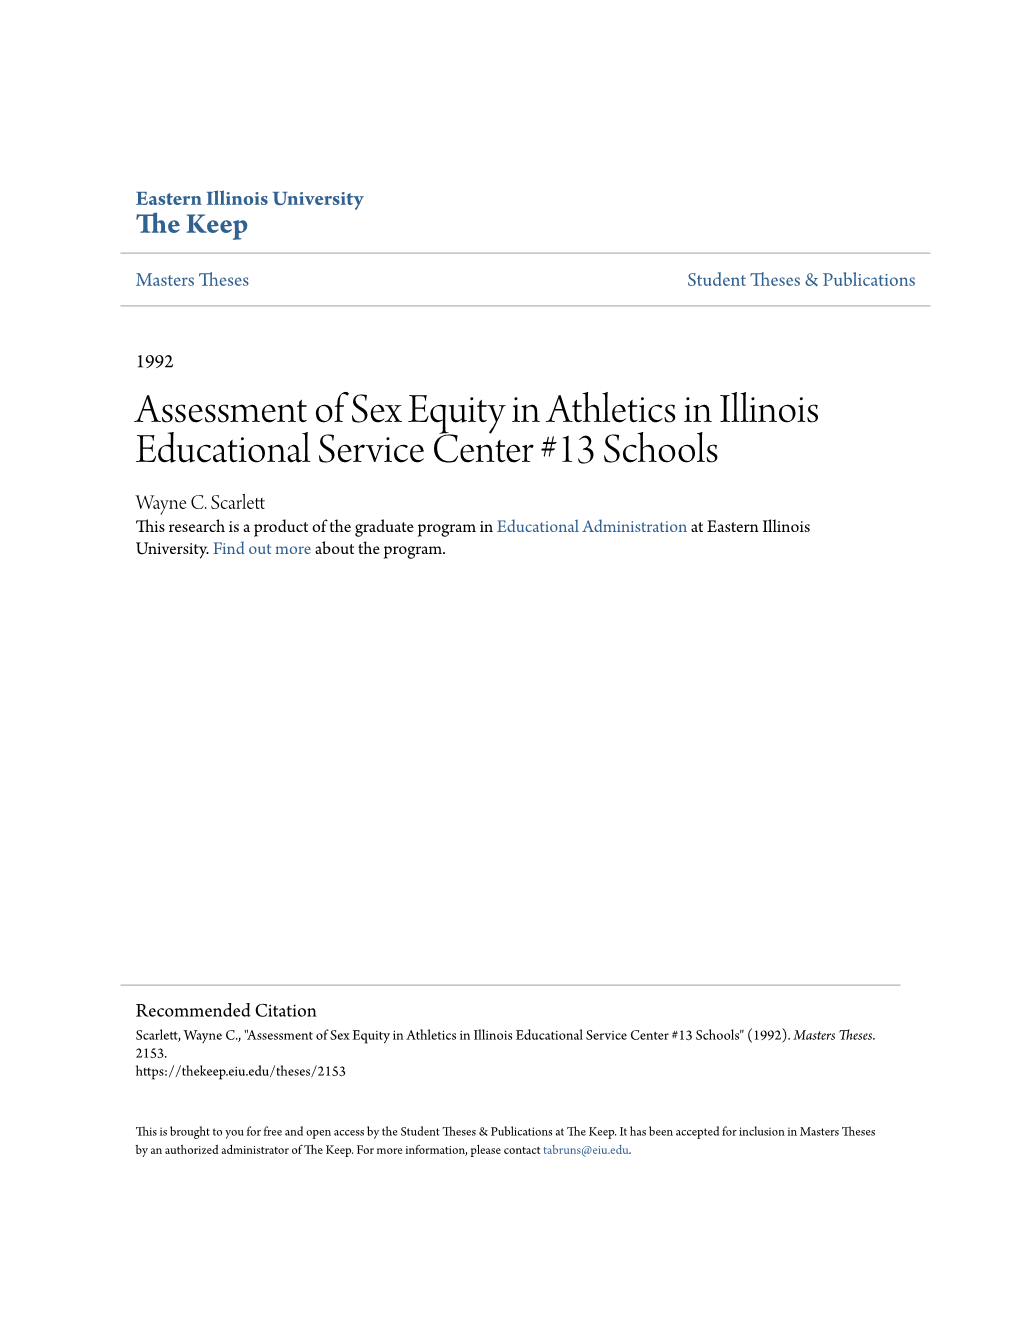 Assessment of Sex Equity in Athletics in Illinois Educational Service Center #13 Schools Wayne C